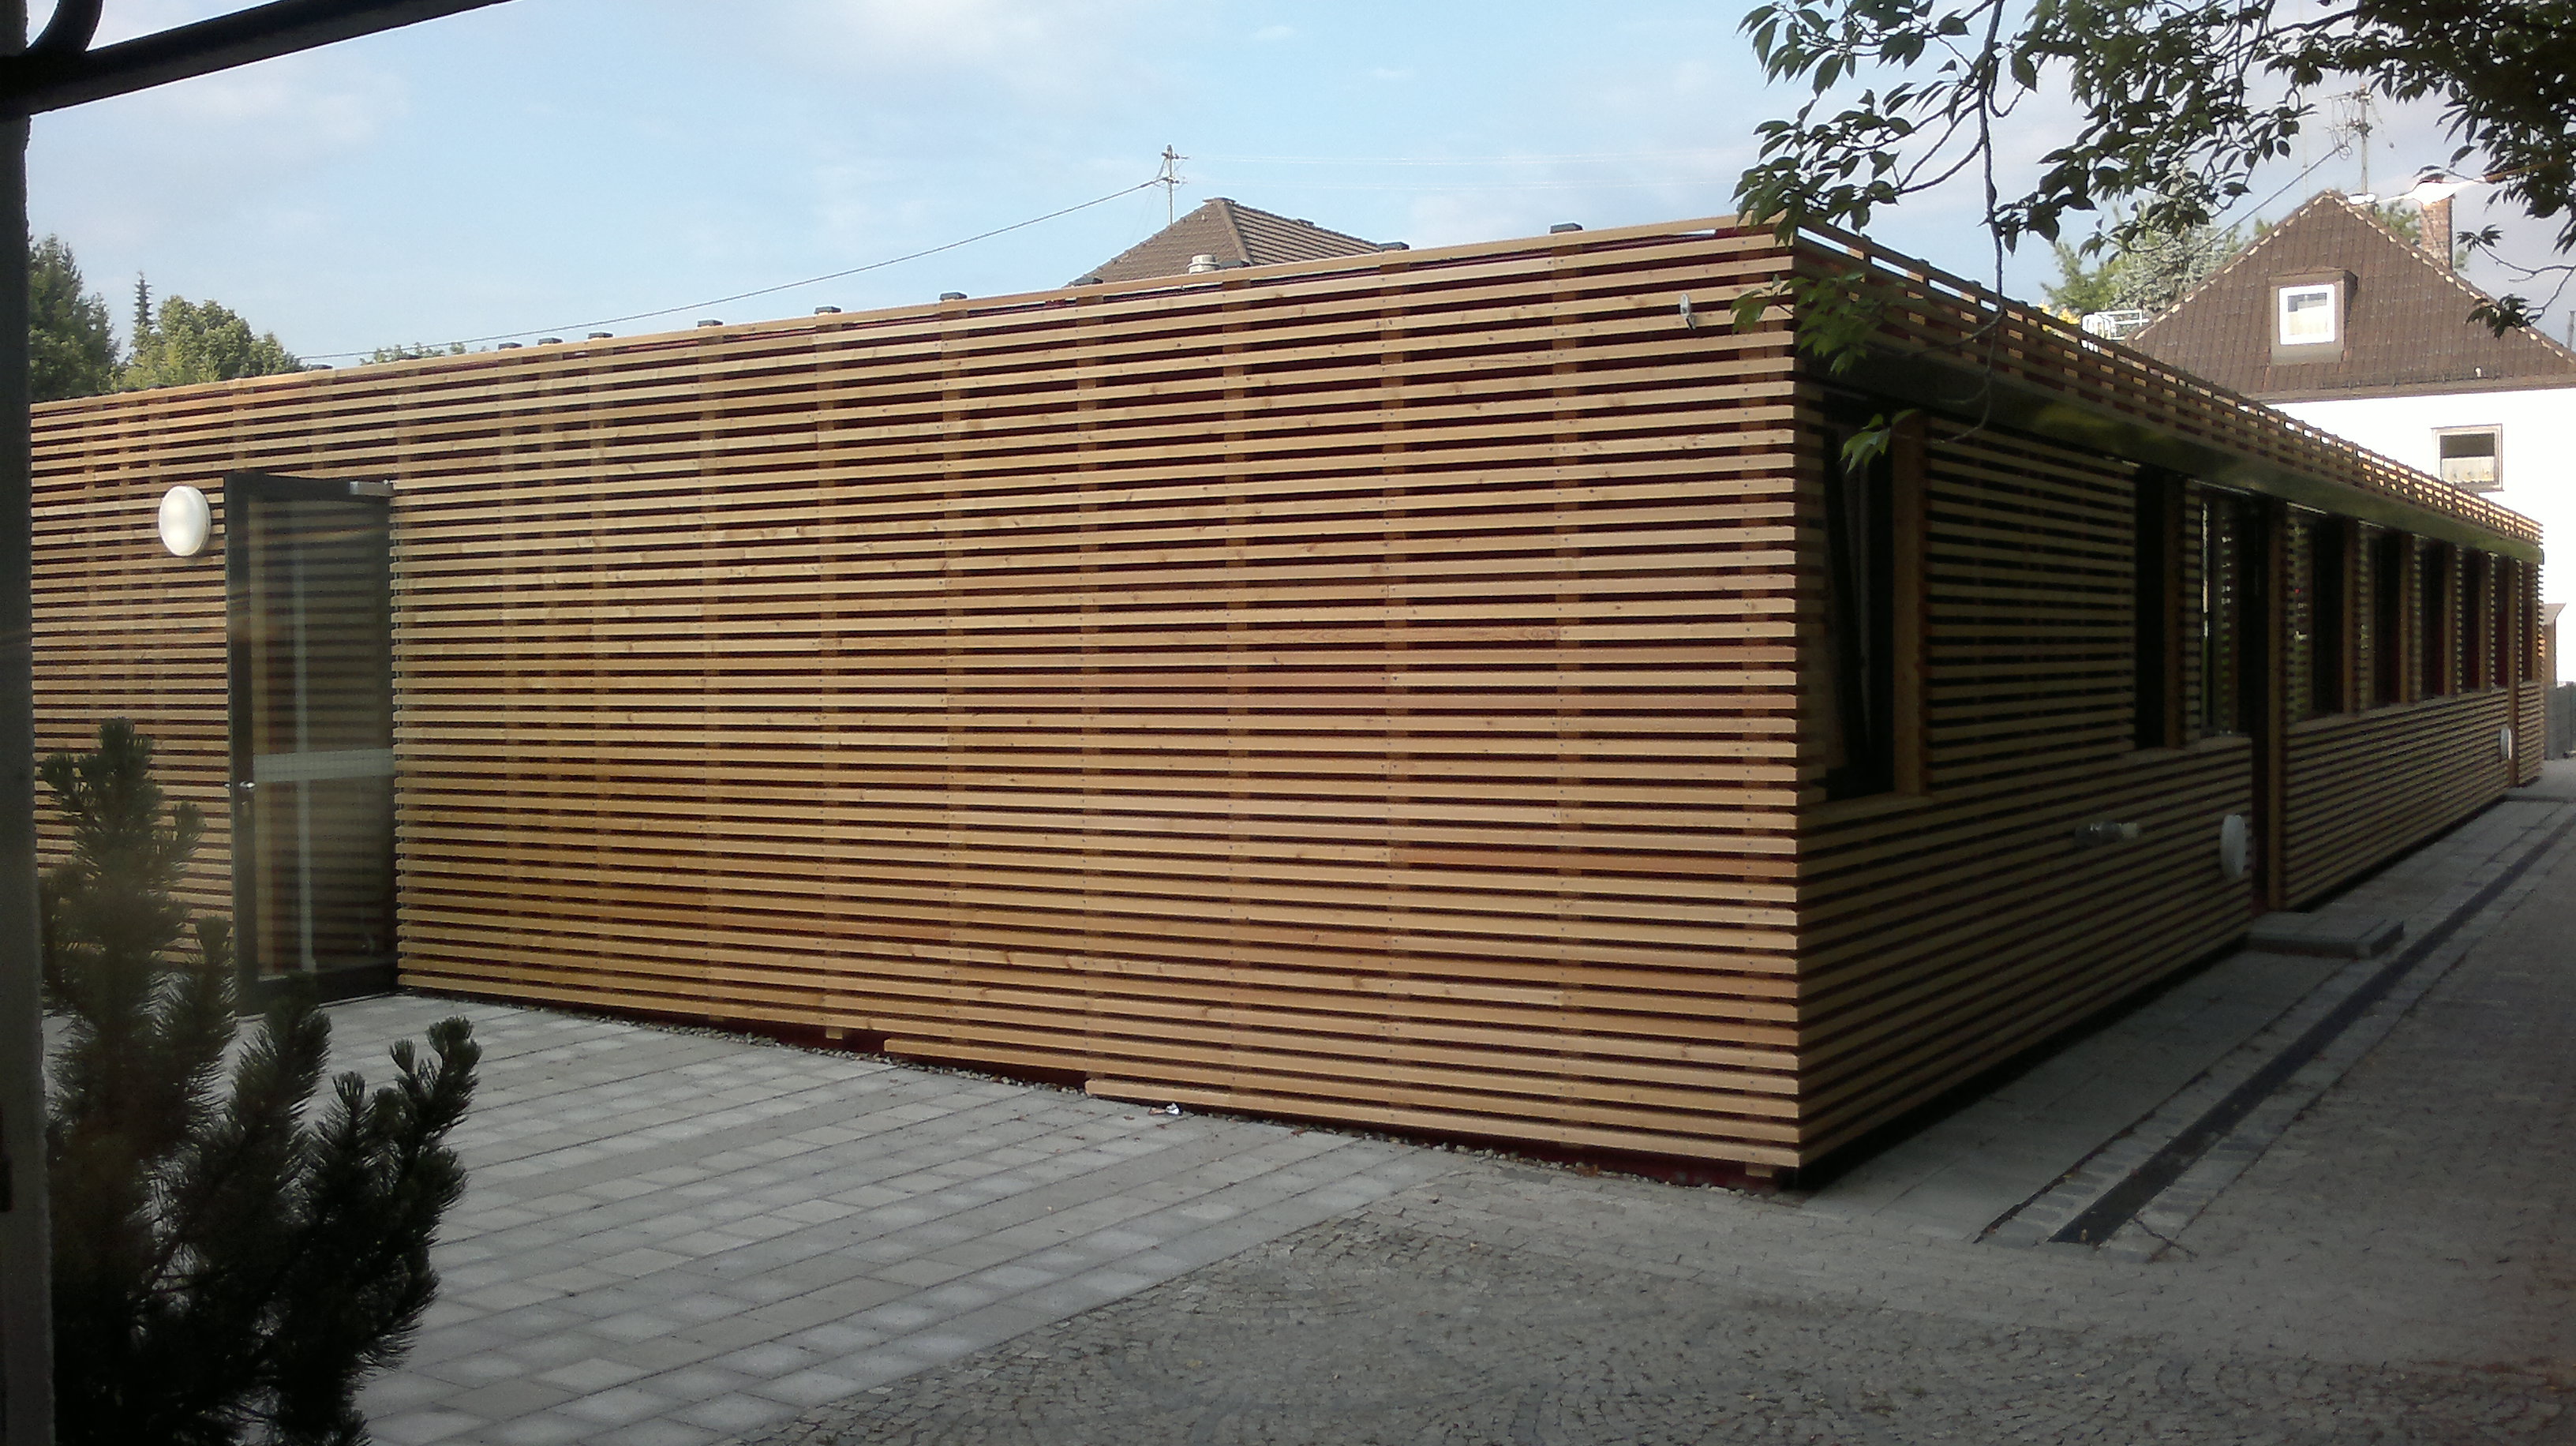 Beautiful larch facade on a school in Italy